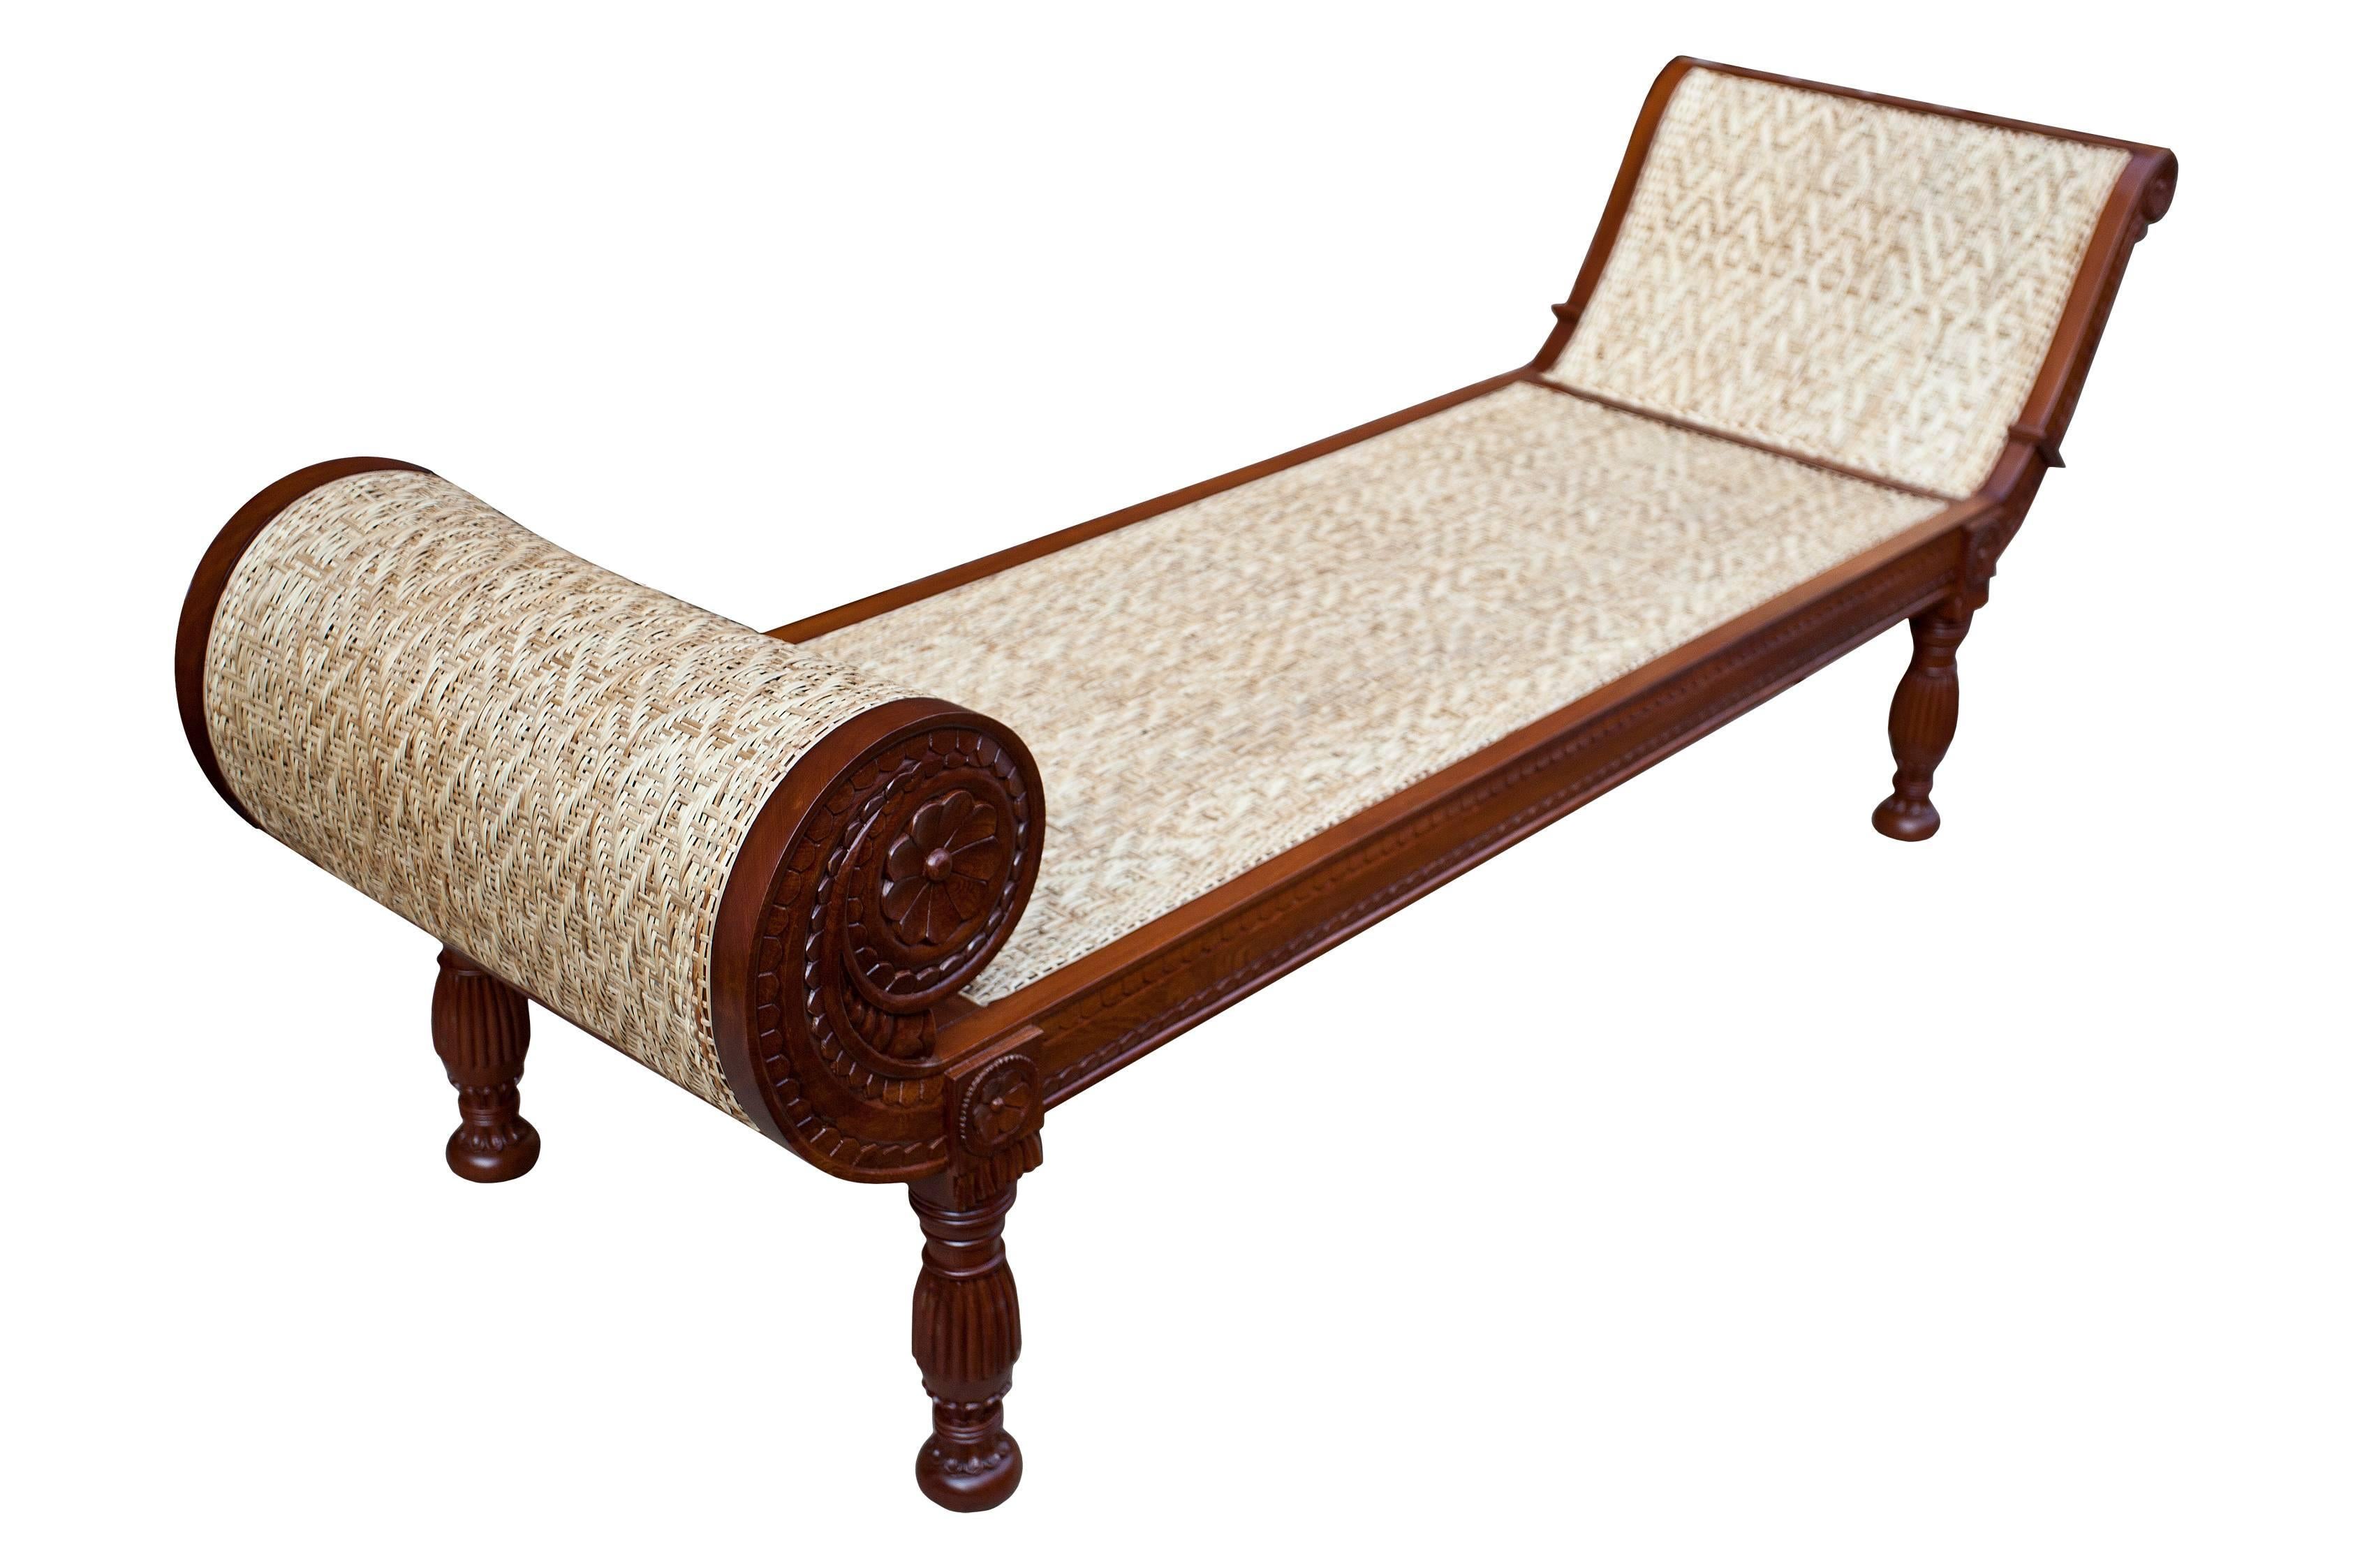 An exceptional piece, mahogany with finely carved details and tightly woven caned seat (redone) in a diamond design. Rolled end on one side and a custom-made three inch cushion with bolster and two pillows done in a silk linen, mid-late 1900s.